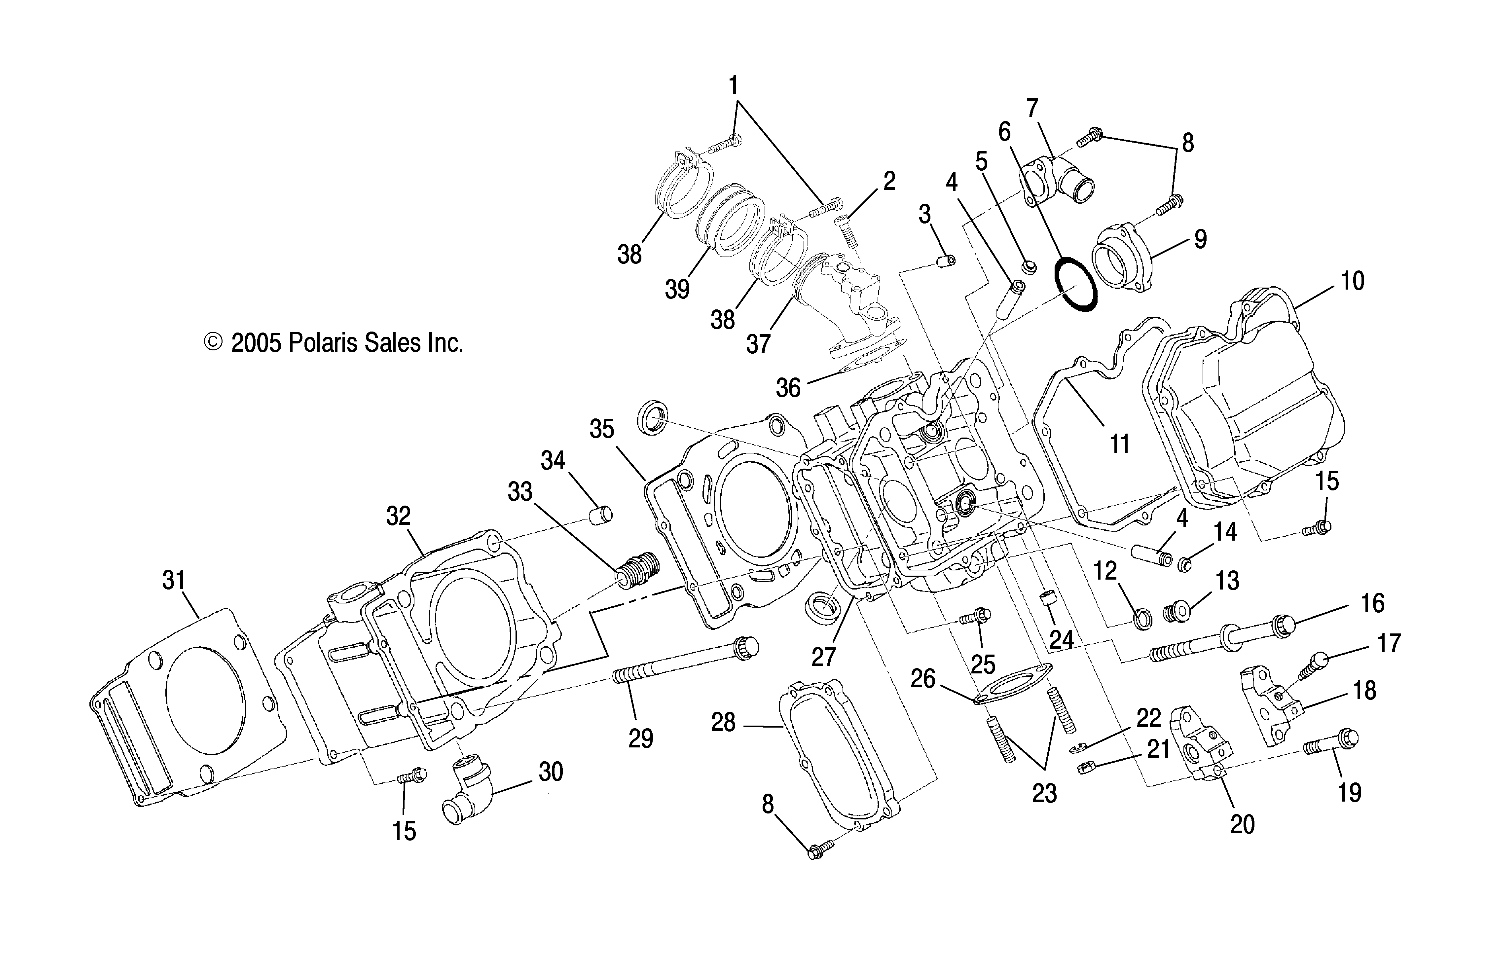 Part Number : 3089897 ADAPTER